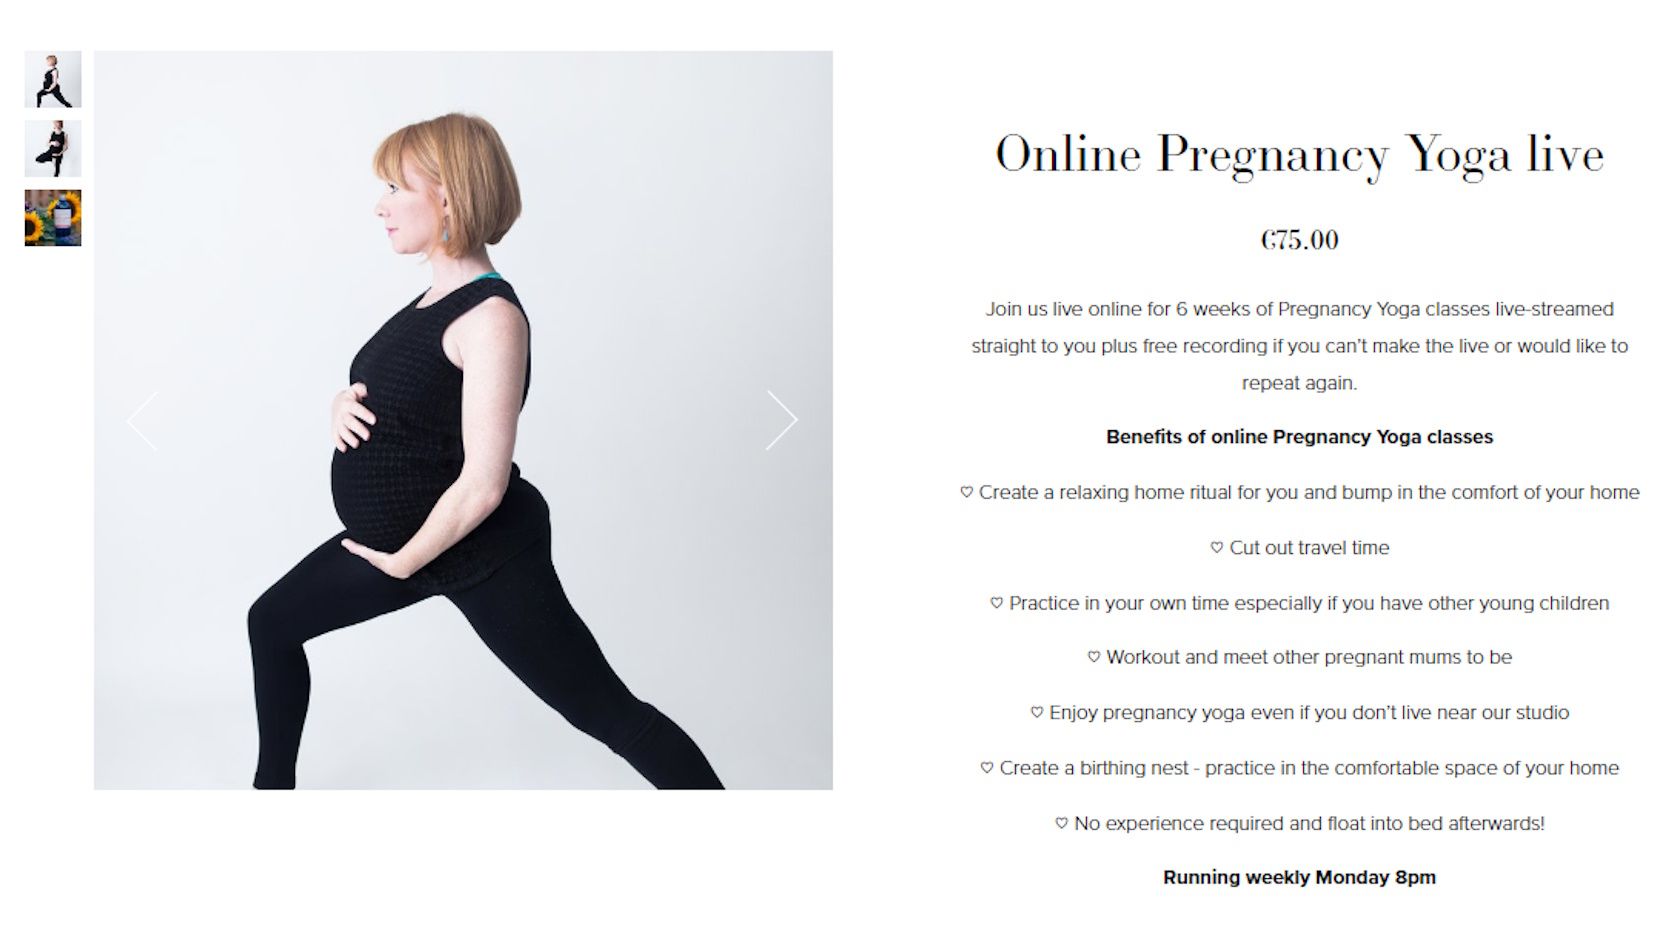 Prenatal Yoga: Not a One-Size-Fits-All Practice - YogaUOnline